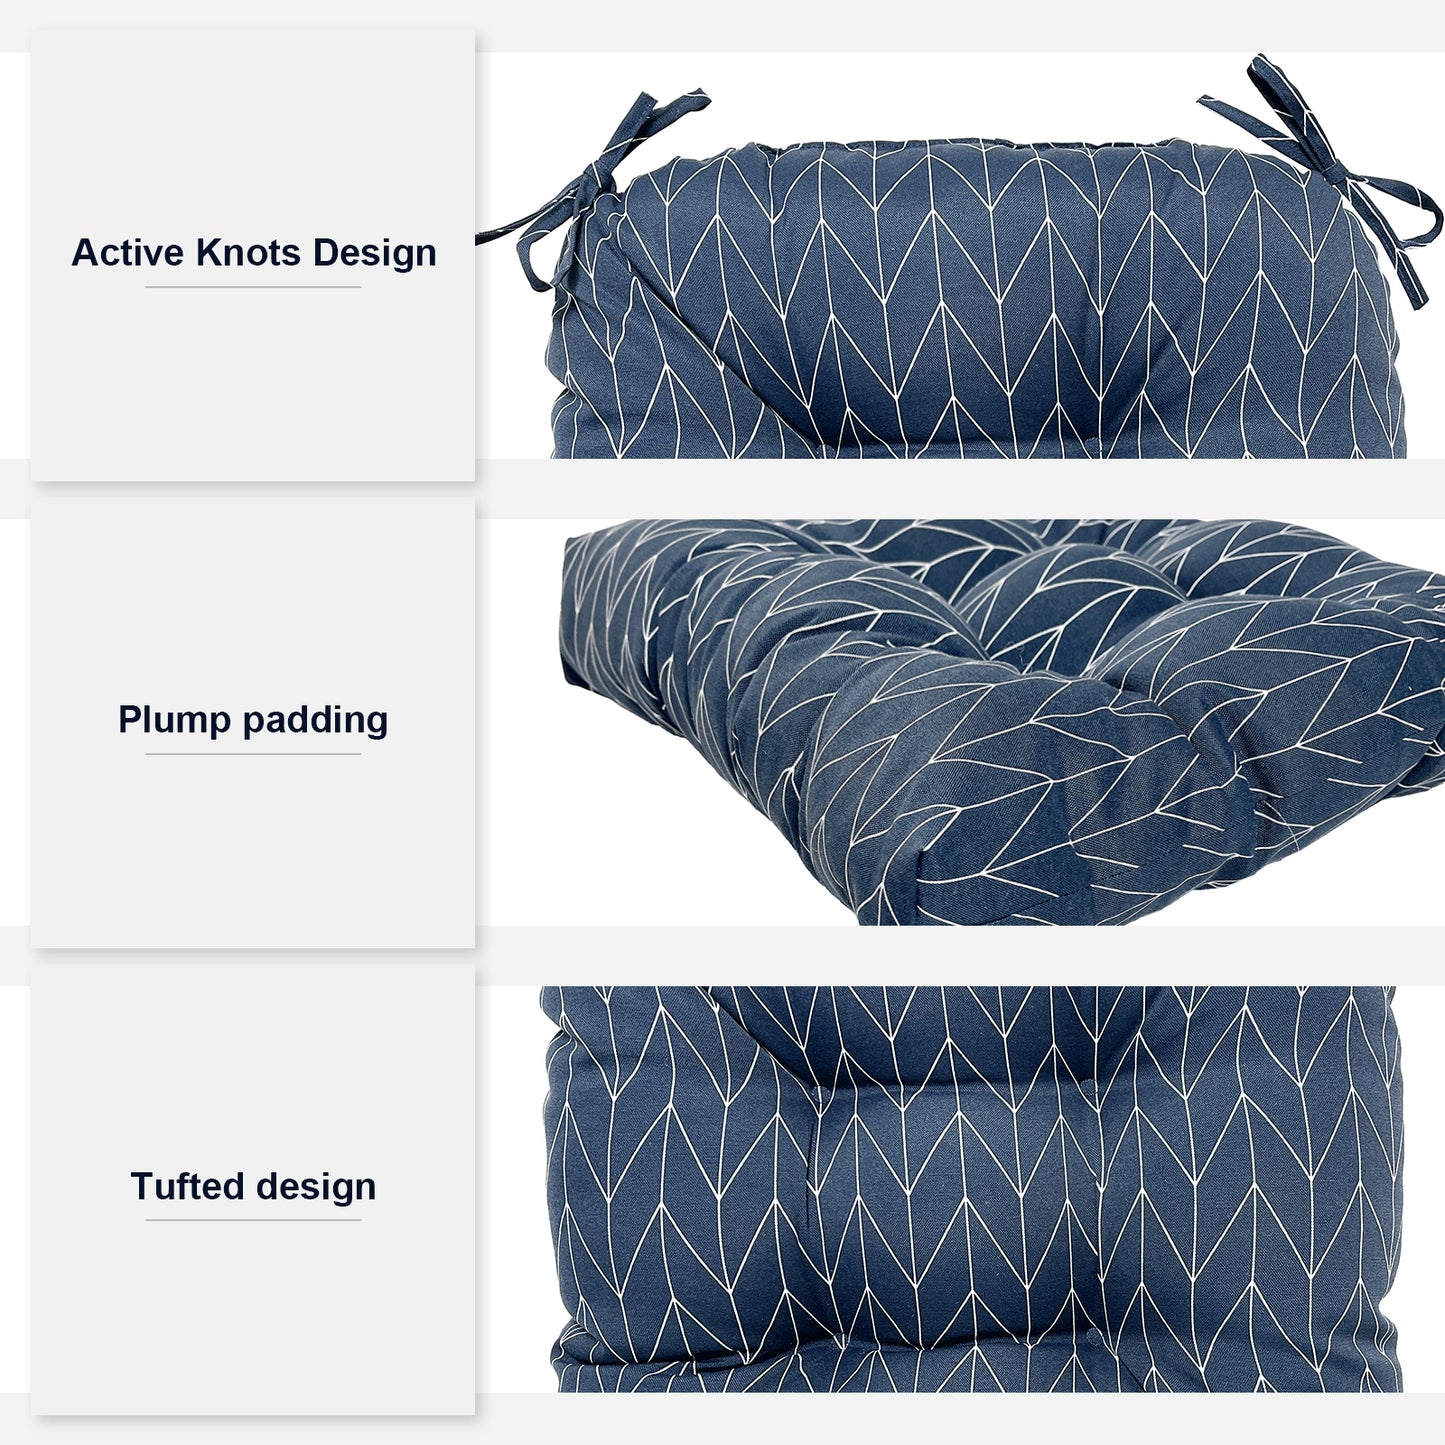 Melody Elephant Patio Wicker Chair Cushions, All Weather Outdoor Tufted Chair Pads Pack of 2, 19 x 19 x 5 Inch U-Shaped Seat Cushions of Garden Furniture Decoration, Herringbone Navy